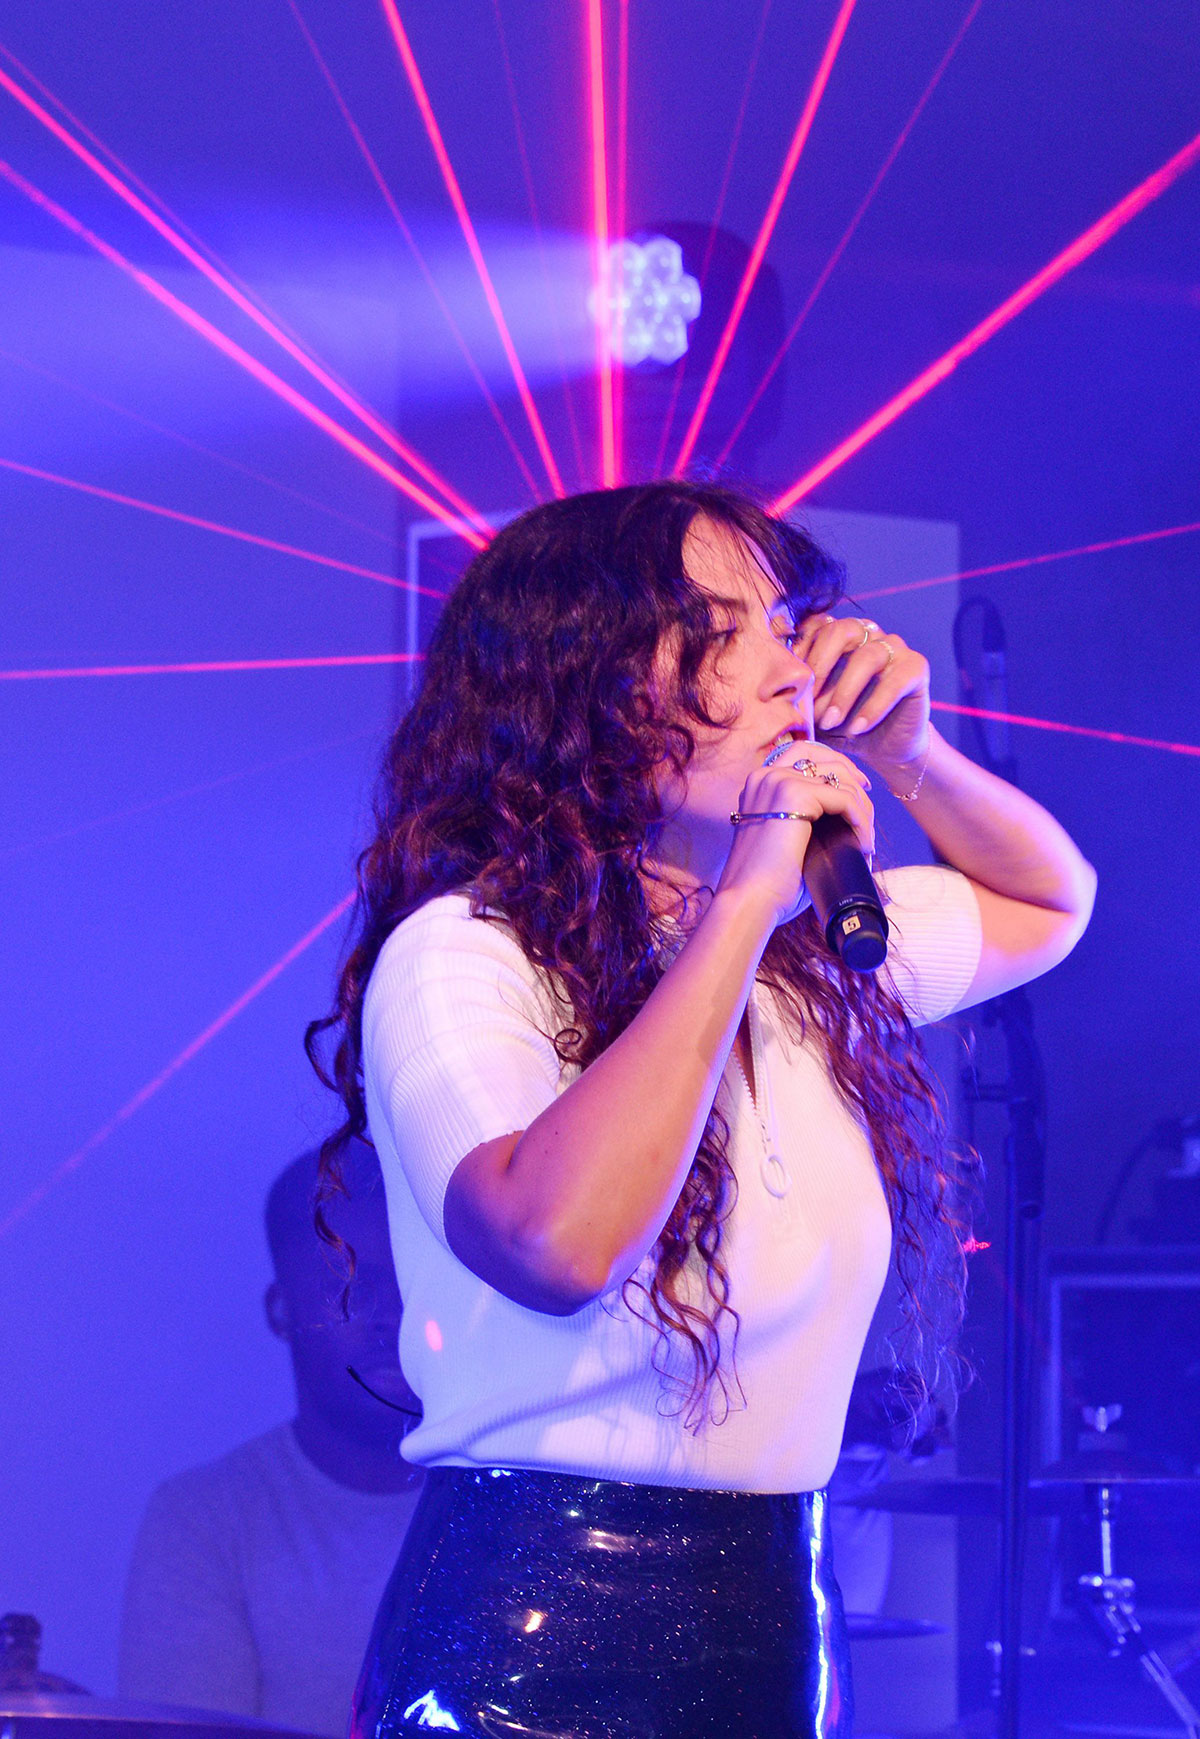 Eliza Doolittle performing at the Audi Polo Challenge